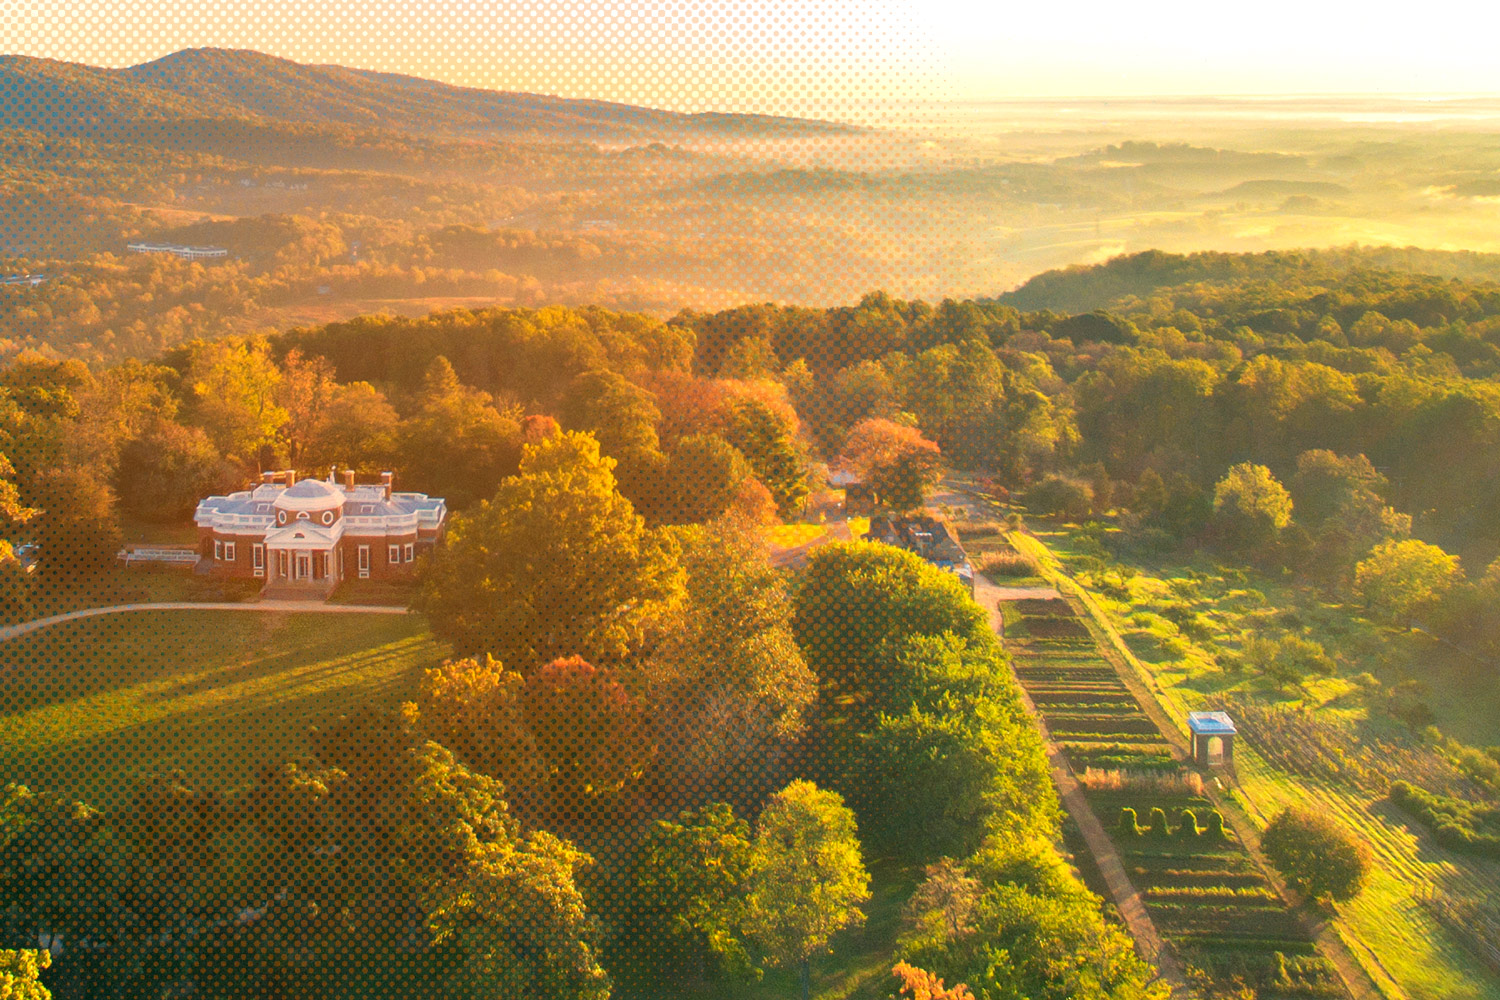 Aerial view of the Monticello and its grounds